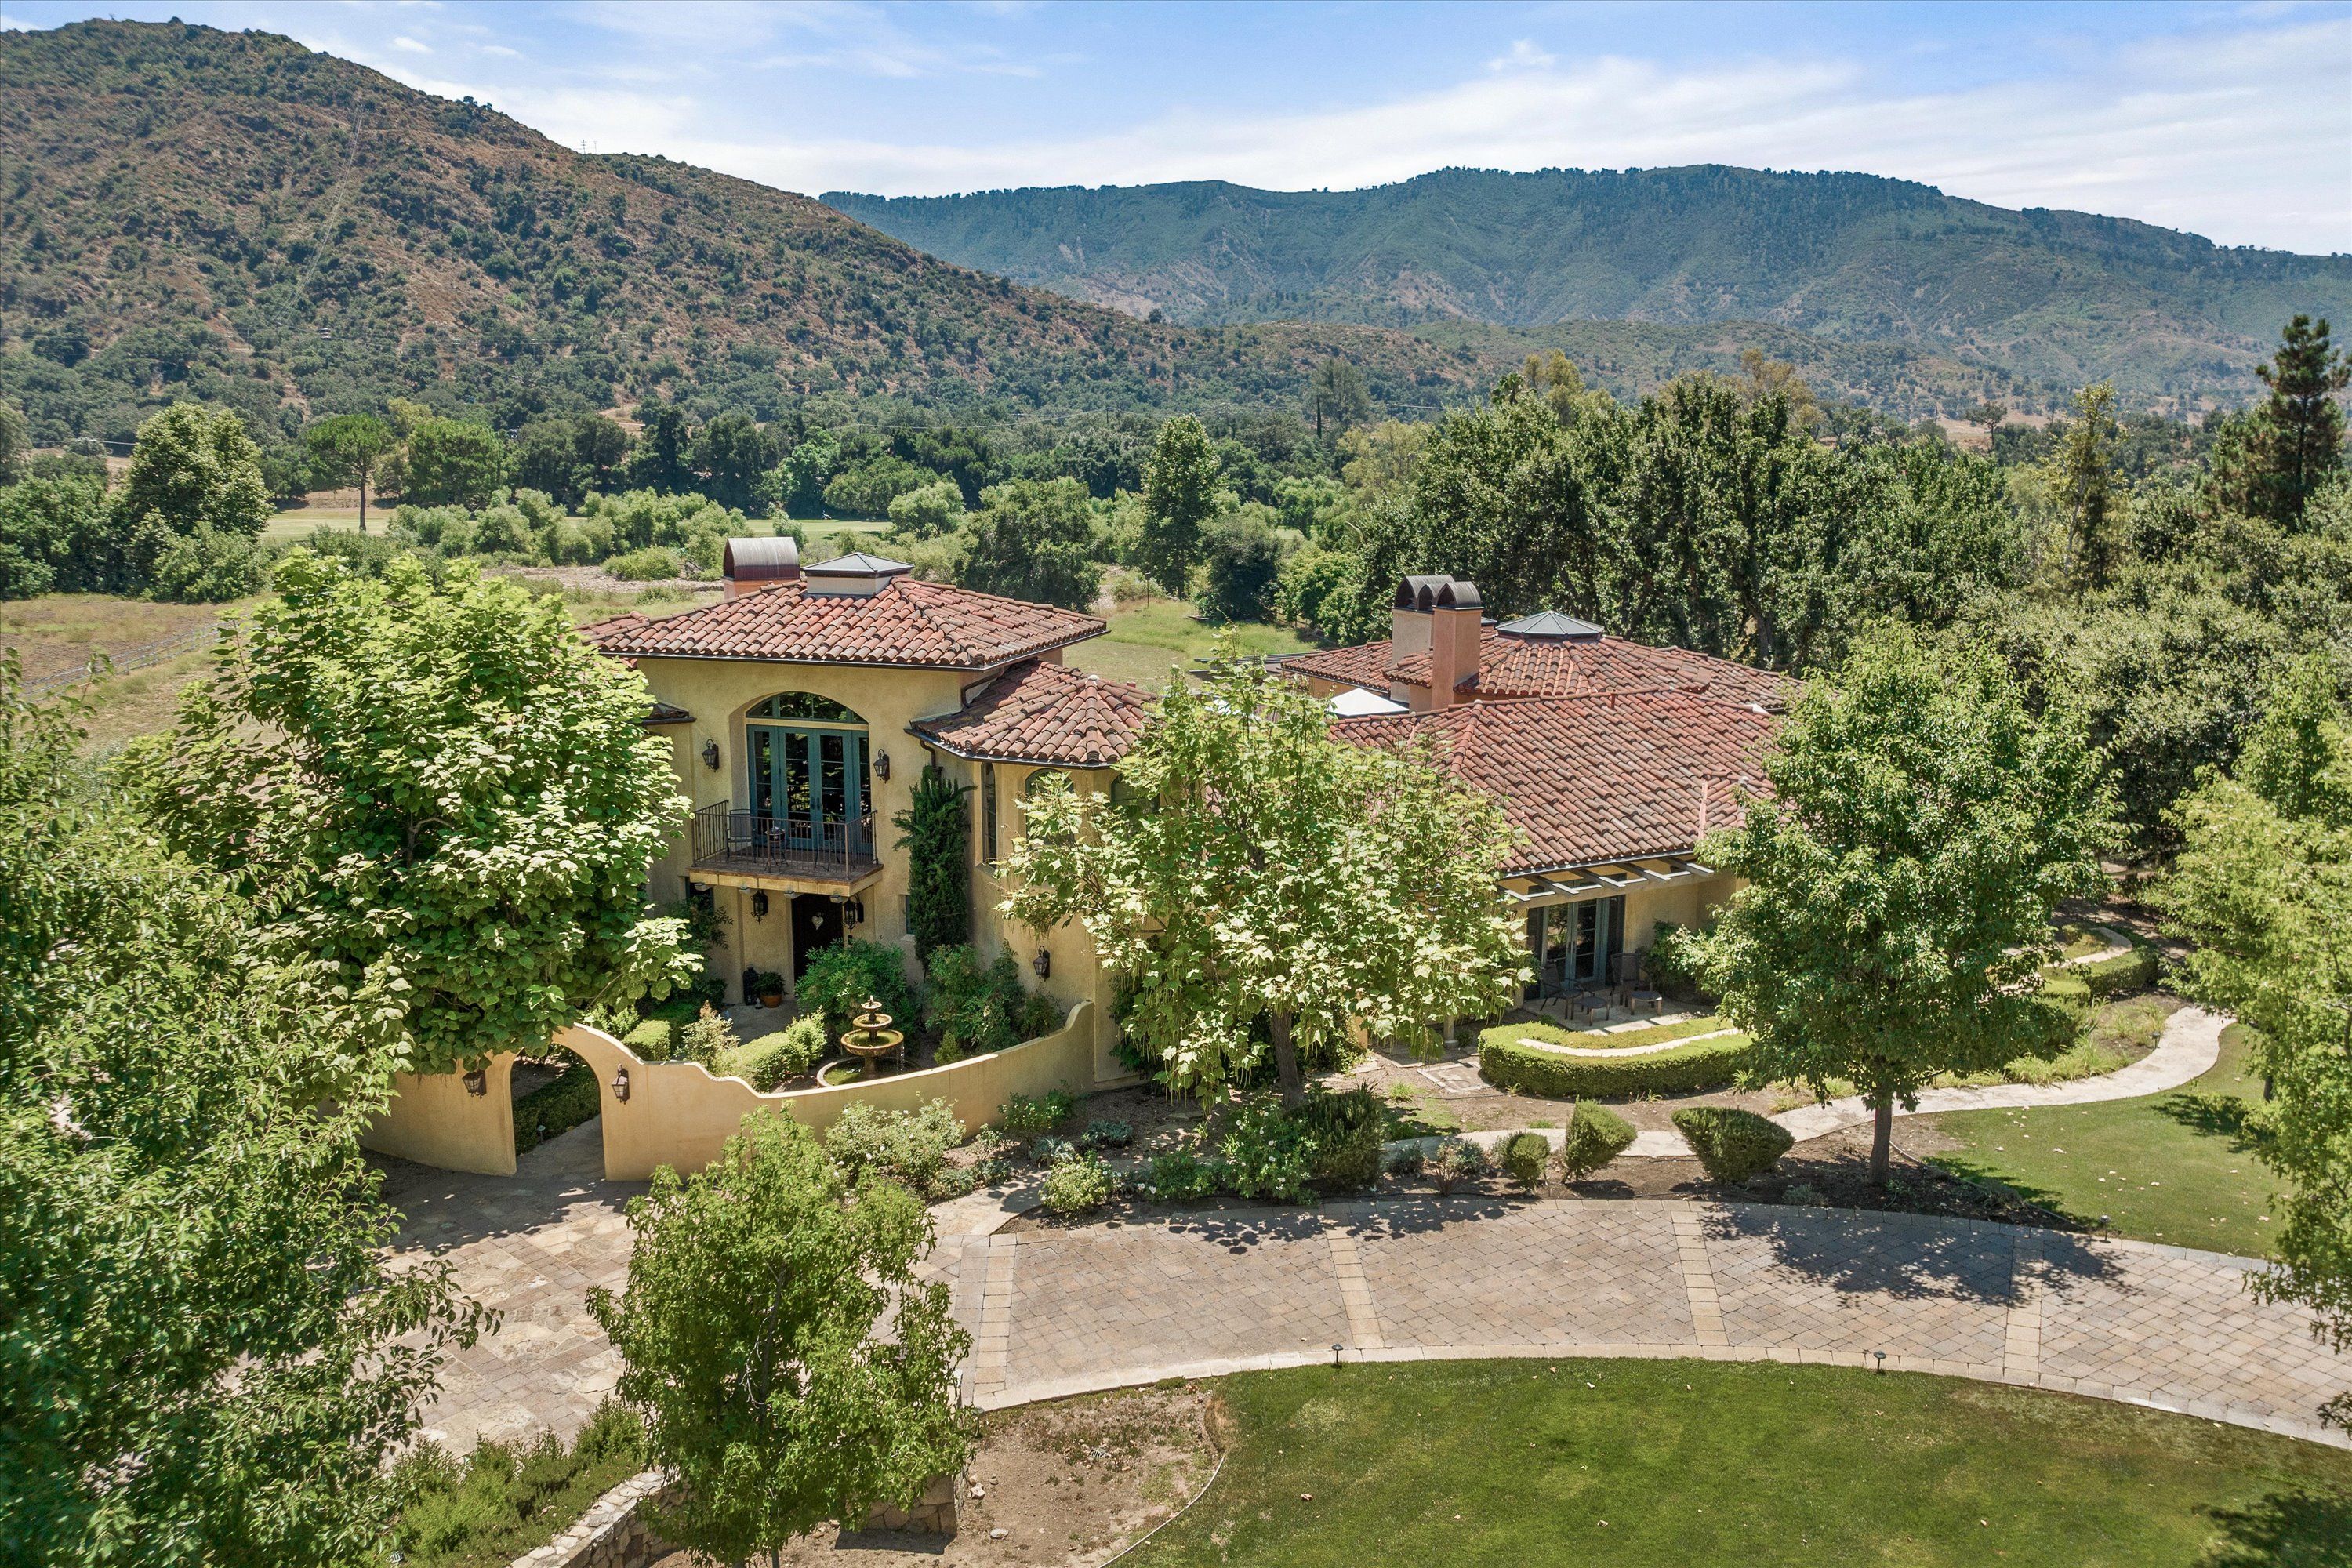 A luxury Ojai home with mountains in the background and a red tiled roof